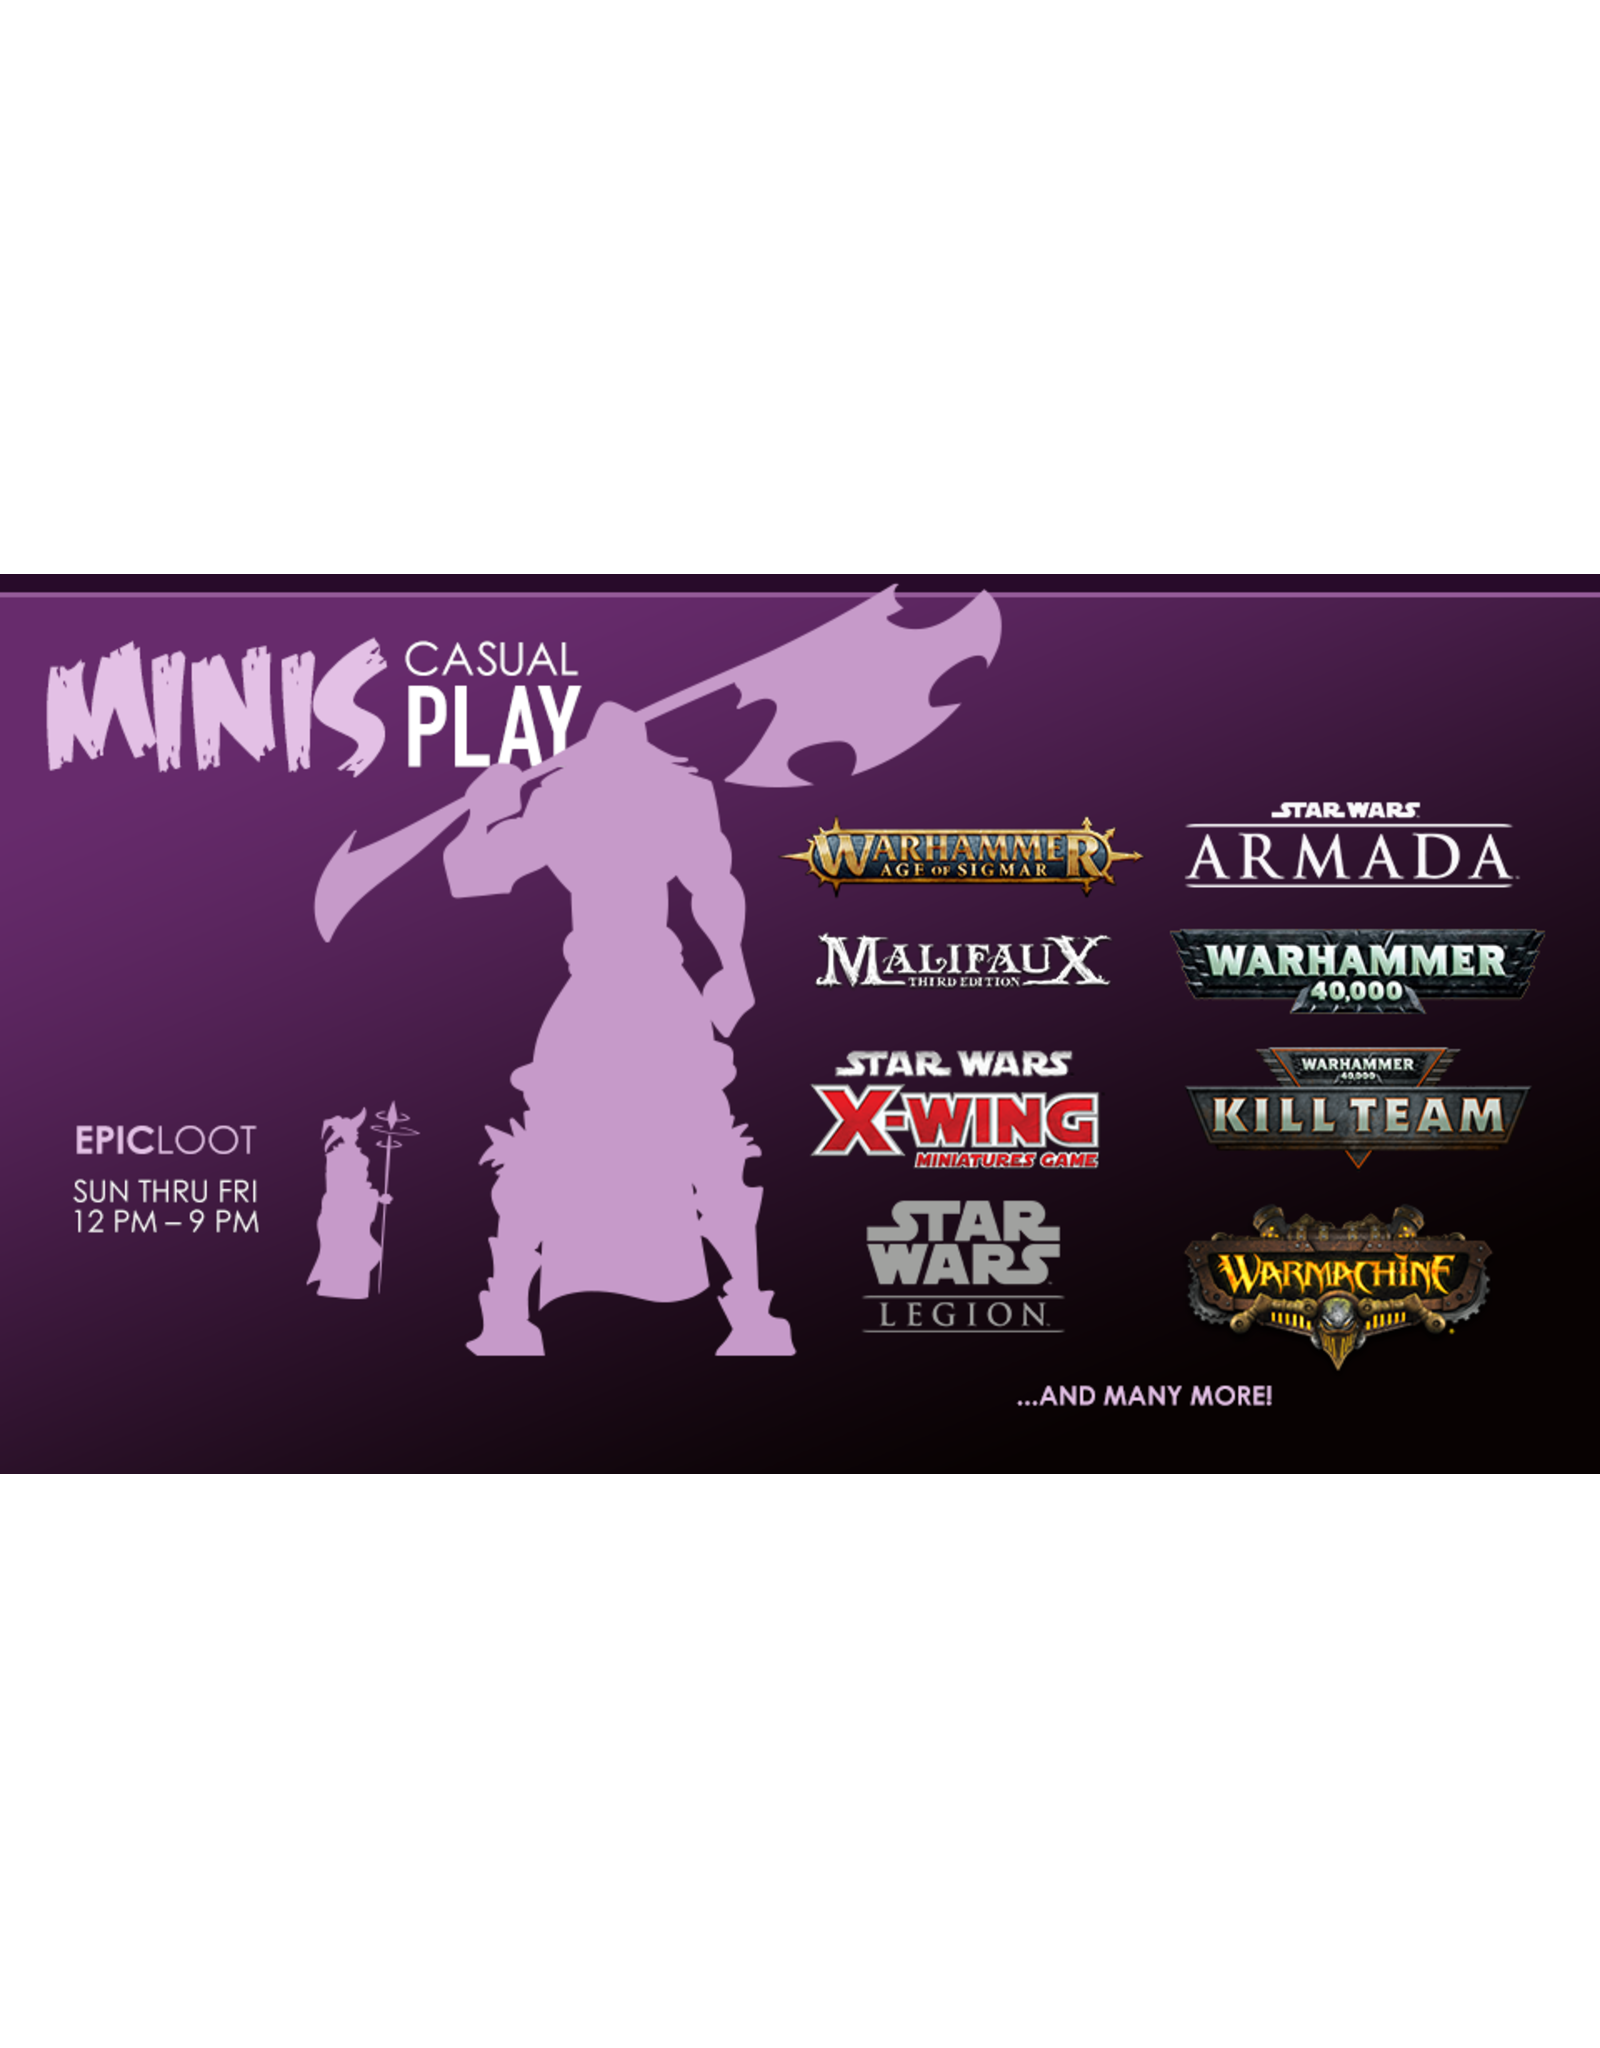 Tues 10/4 12PM - 9PM Minis Casual Play